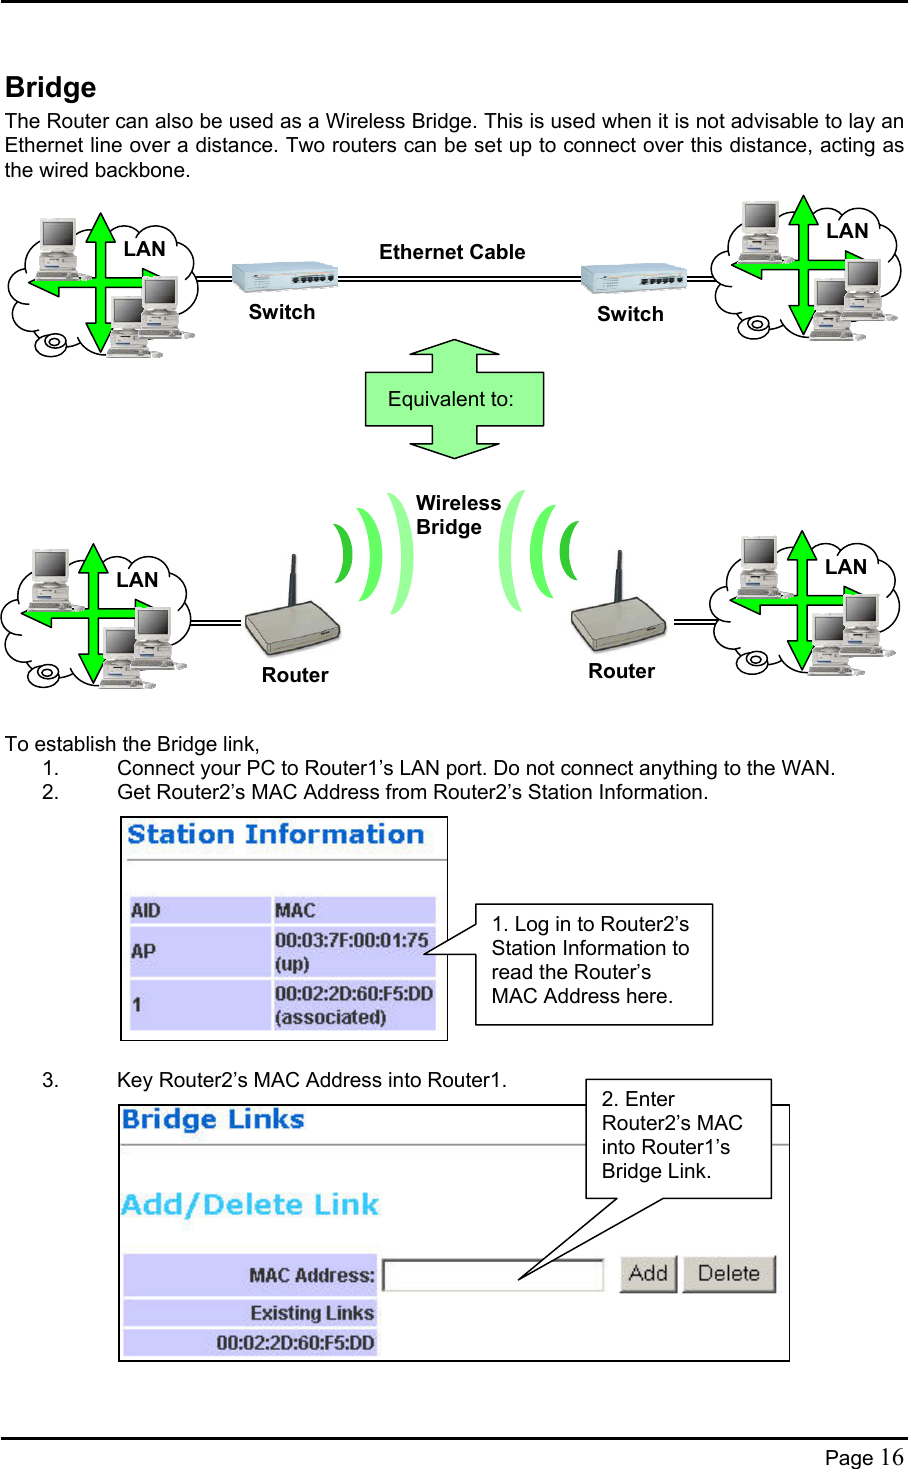  Bridge The Router can also be used as a Wireless Bridge. This is used when it is not advisable to lay an Ethernet line over a distance. Two routers can be set up to connect over this distance, acting as the wired backbone.             Equivalent to: LAN LAN  SwitchSwitch Ethernet Cable          Wireless Bridge RouterLAN LAN  Router  To establish the Bridge link, 1.  Connect your PC to Router1’s LAN port. Do not connect anything to the WAN. 2.  Get Router2’s MAC Address from Router2’s Station Information.  1. Log in to Router2’s Station Information to read the Router’s MAC Address here.           3.  Key Router2’s MAC Address into Router1. 2. Enter Router2’s MAC into Router1’s Bridge Link.             Page 16 